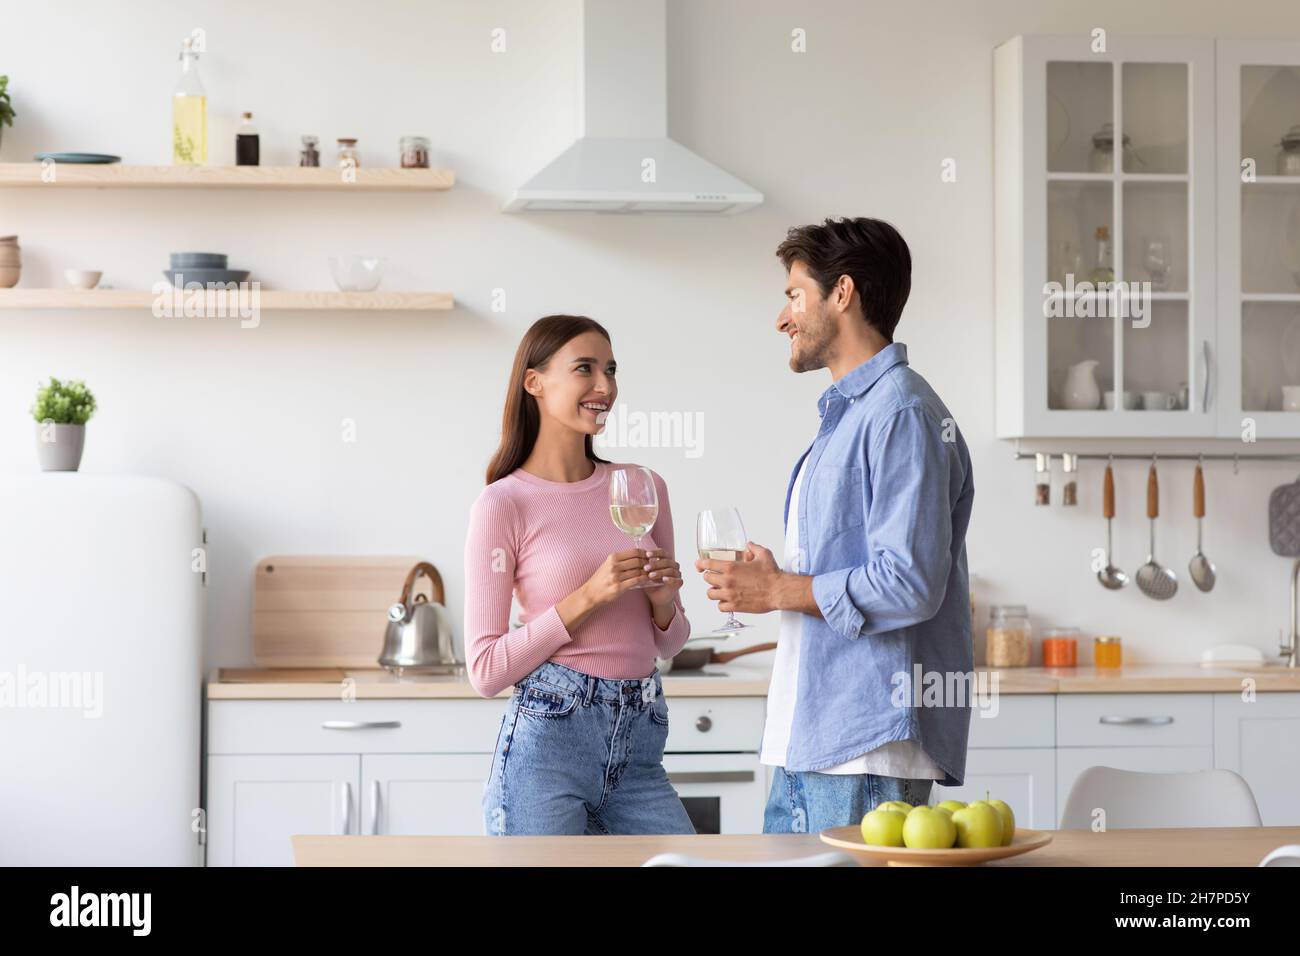 Smiling millennial caucasian family with glasses of wine in modern kitchen interior, celebrate anniversary Stock Photo